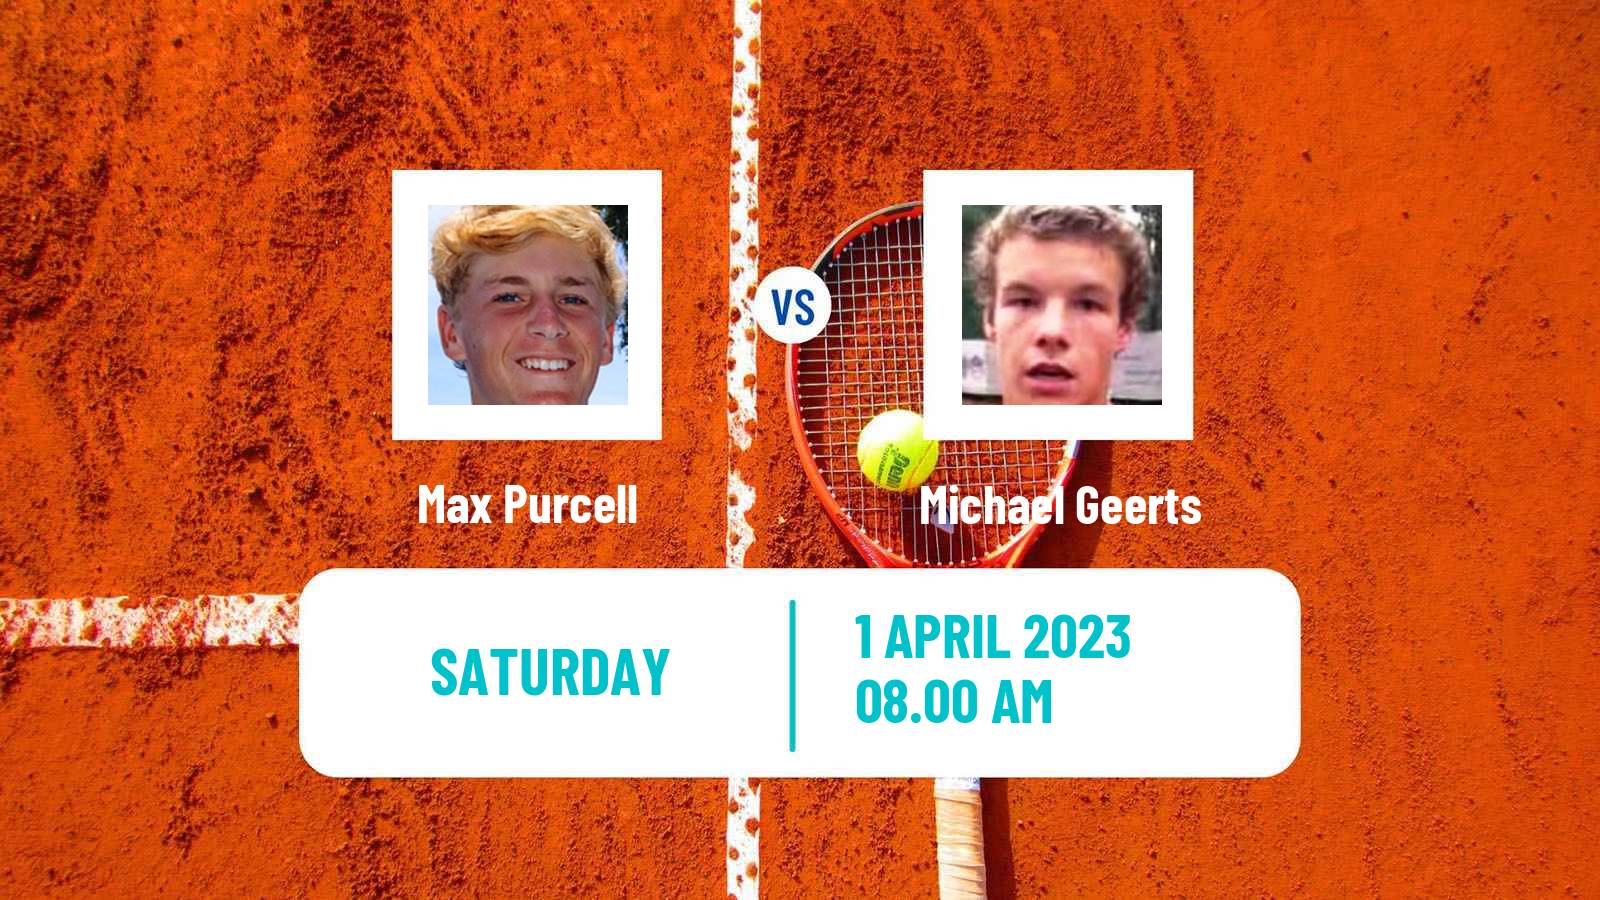 Tennis ATP Challenger Max Purcell - Michael Geerts